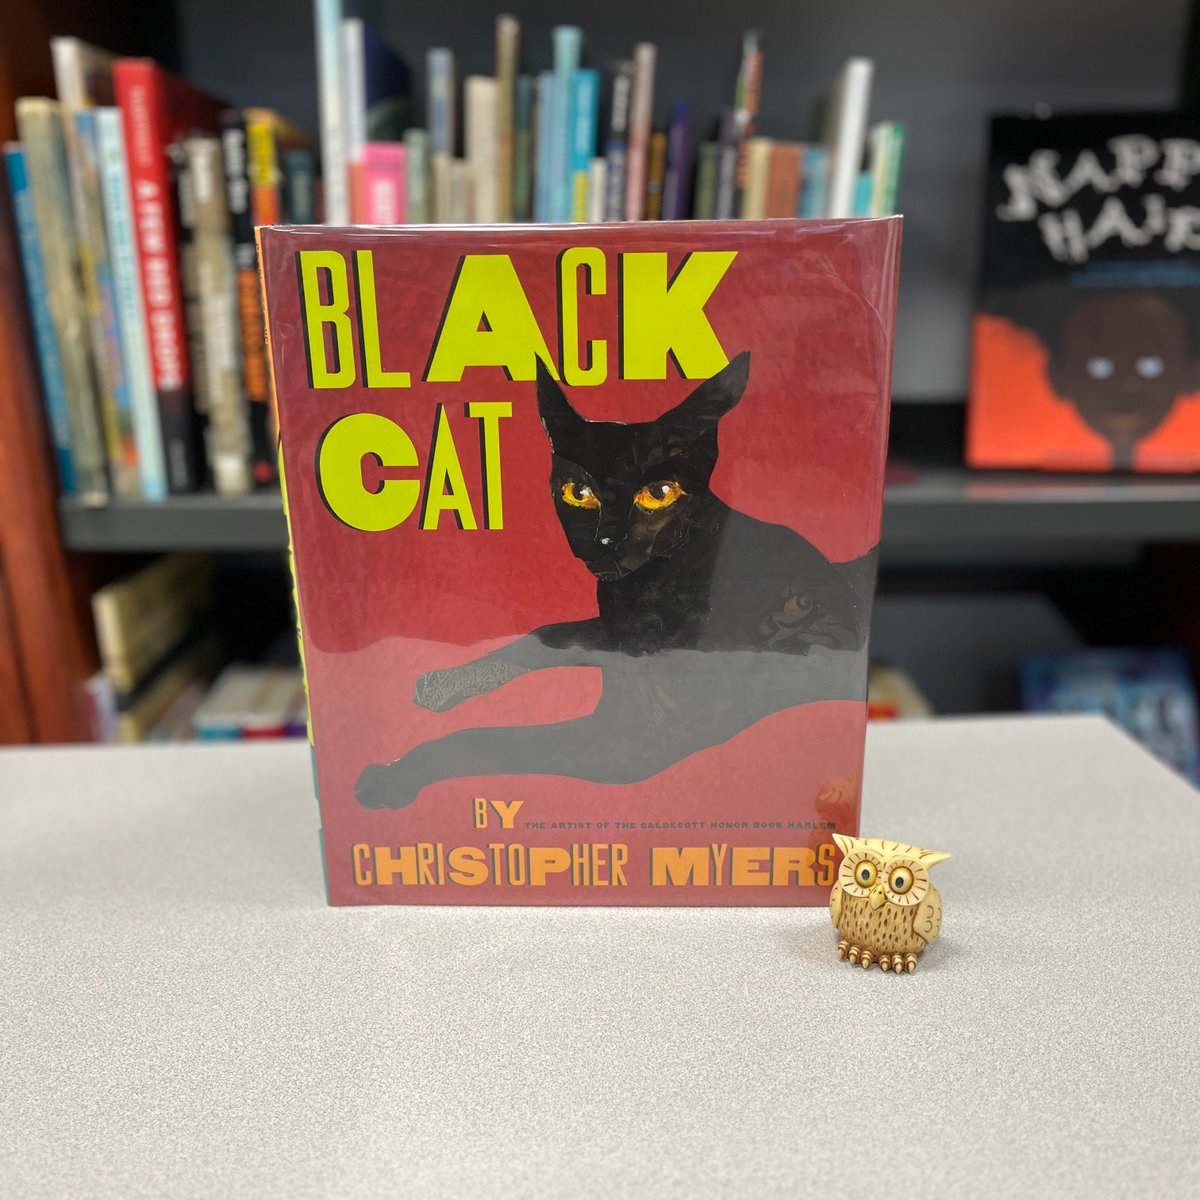 Black Cat written and illustrated by Christopher Myers. A black cat travels through a city looking for a home, accompanied by rhythmic text and collage artwork. #butlermidweekmorris #ChristopherMyers @Scholastic